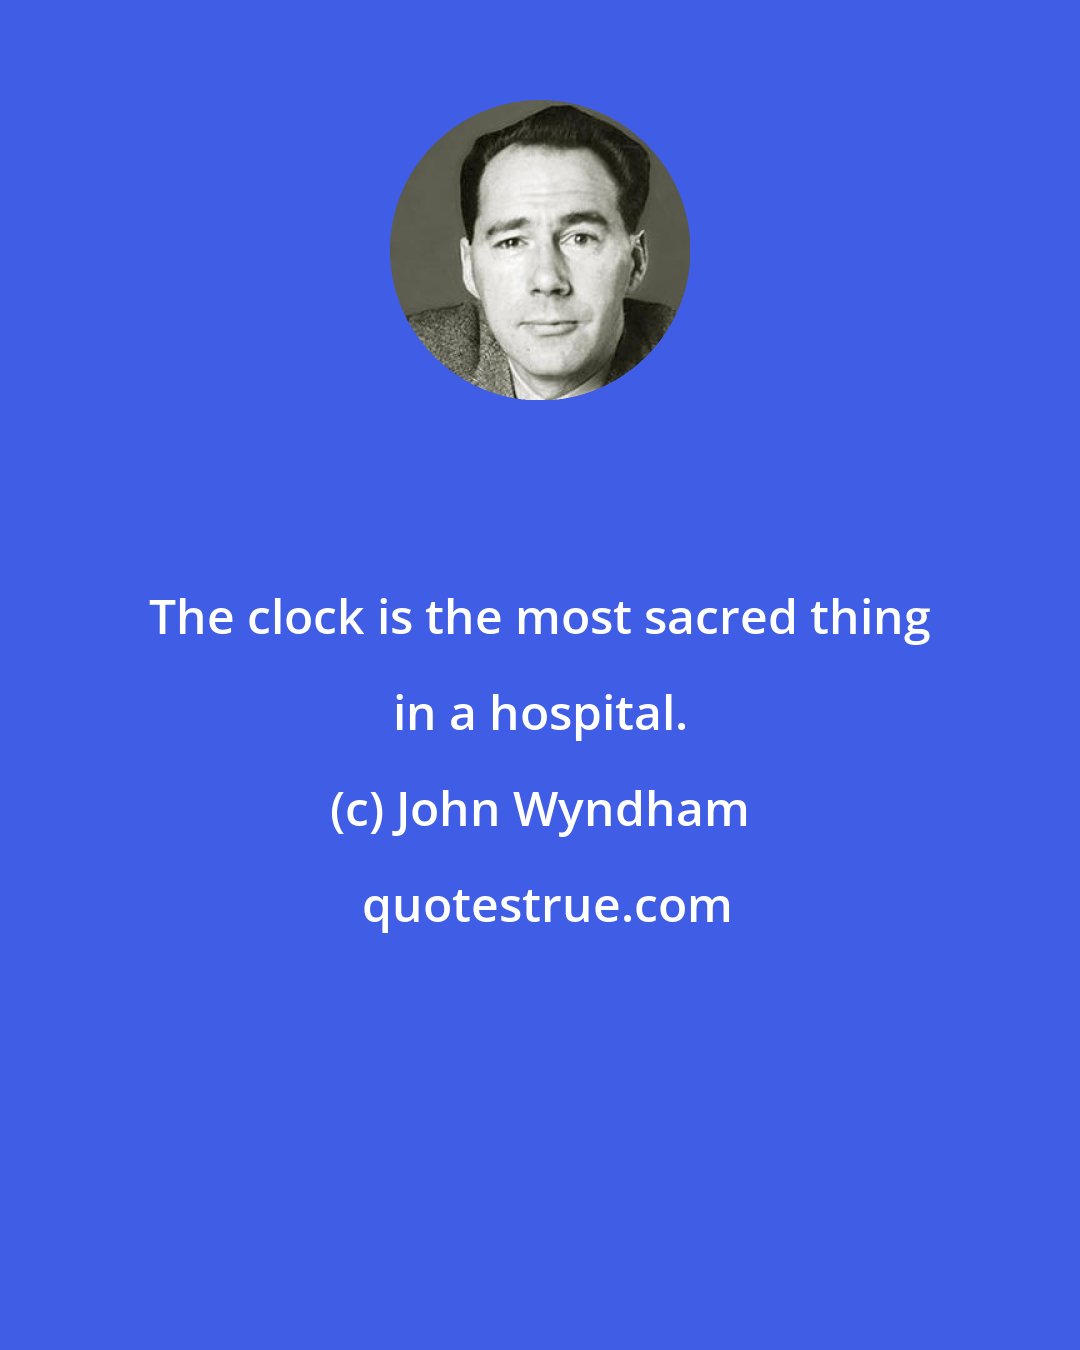 John Wyndham: The clock is the most sacred thing in a hospital.